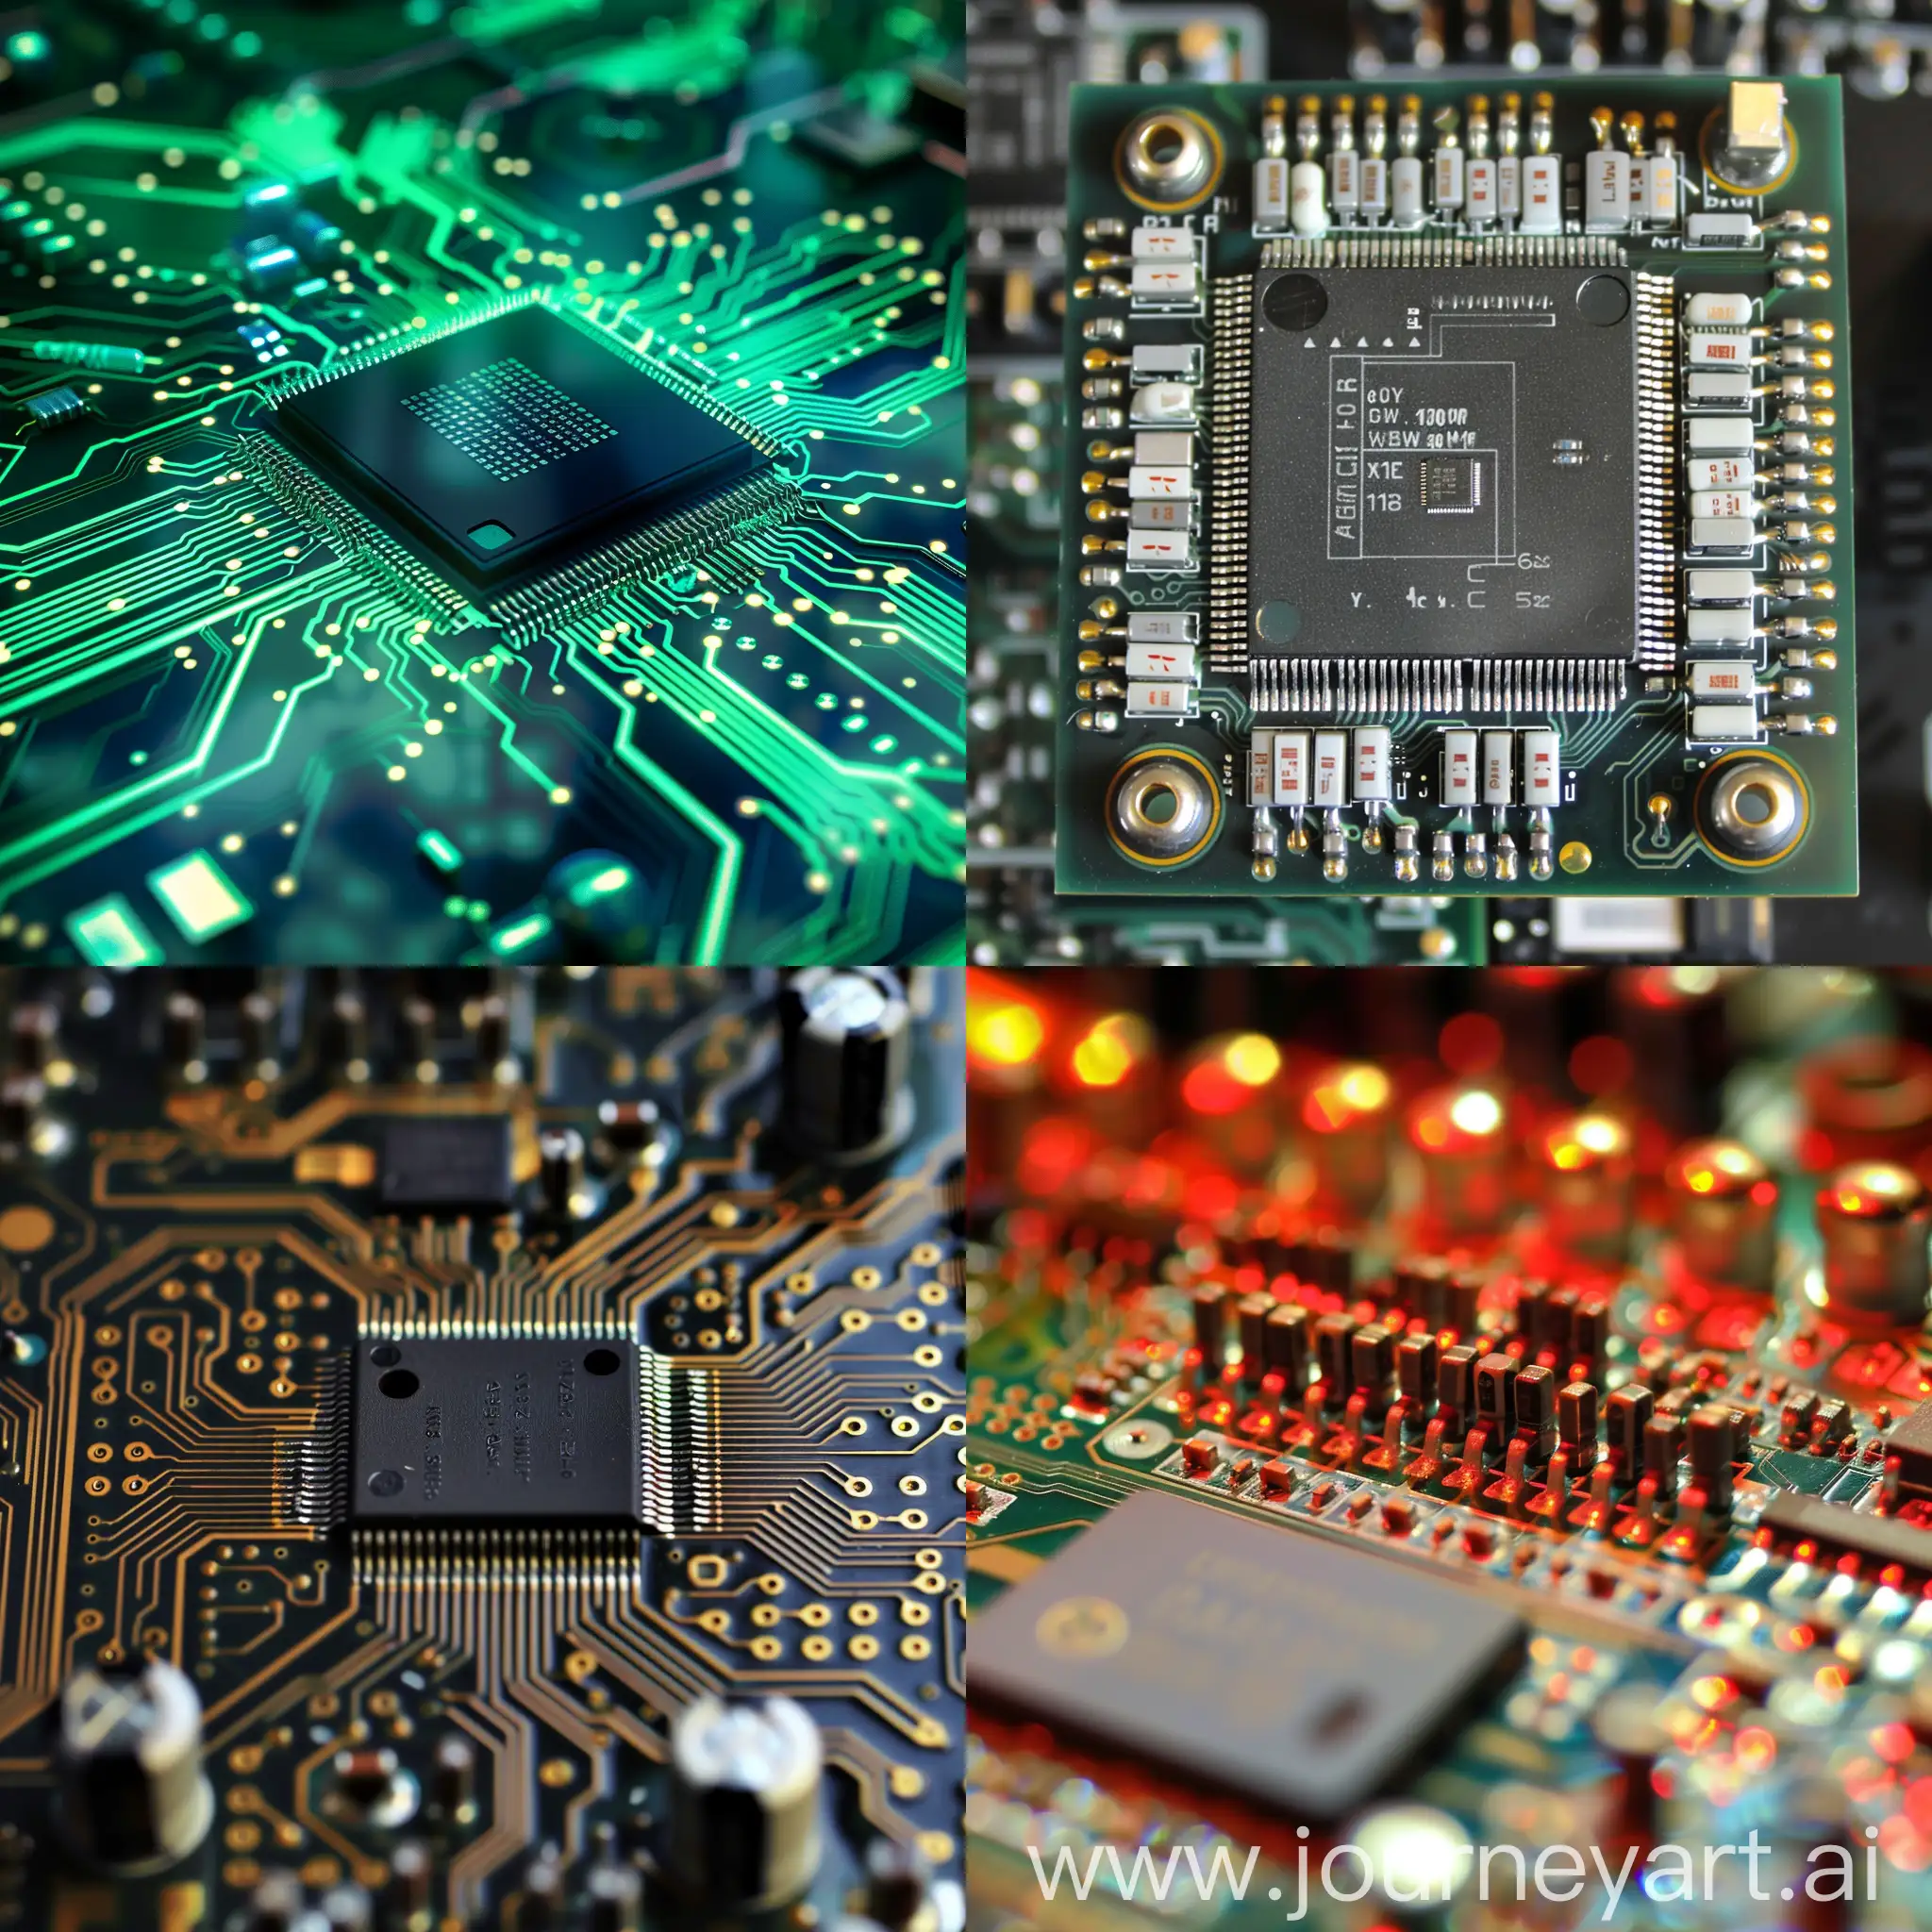 HighPower-Integrated-Circuit-on-Vibrant-Circuit-Board